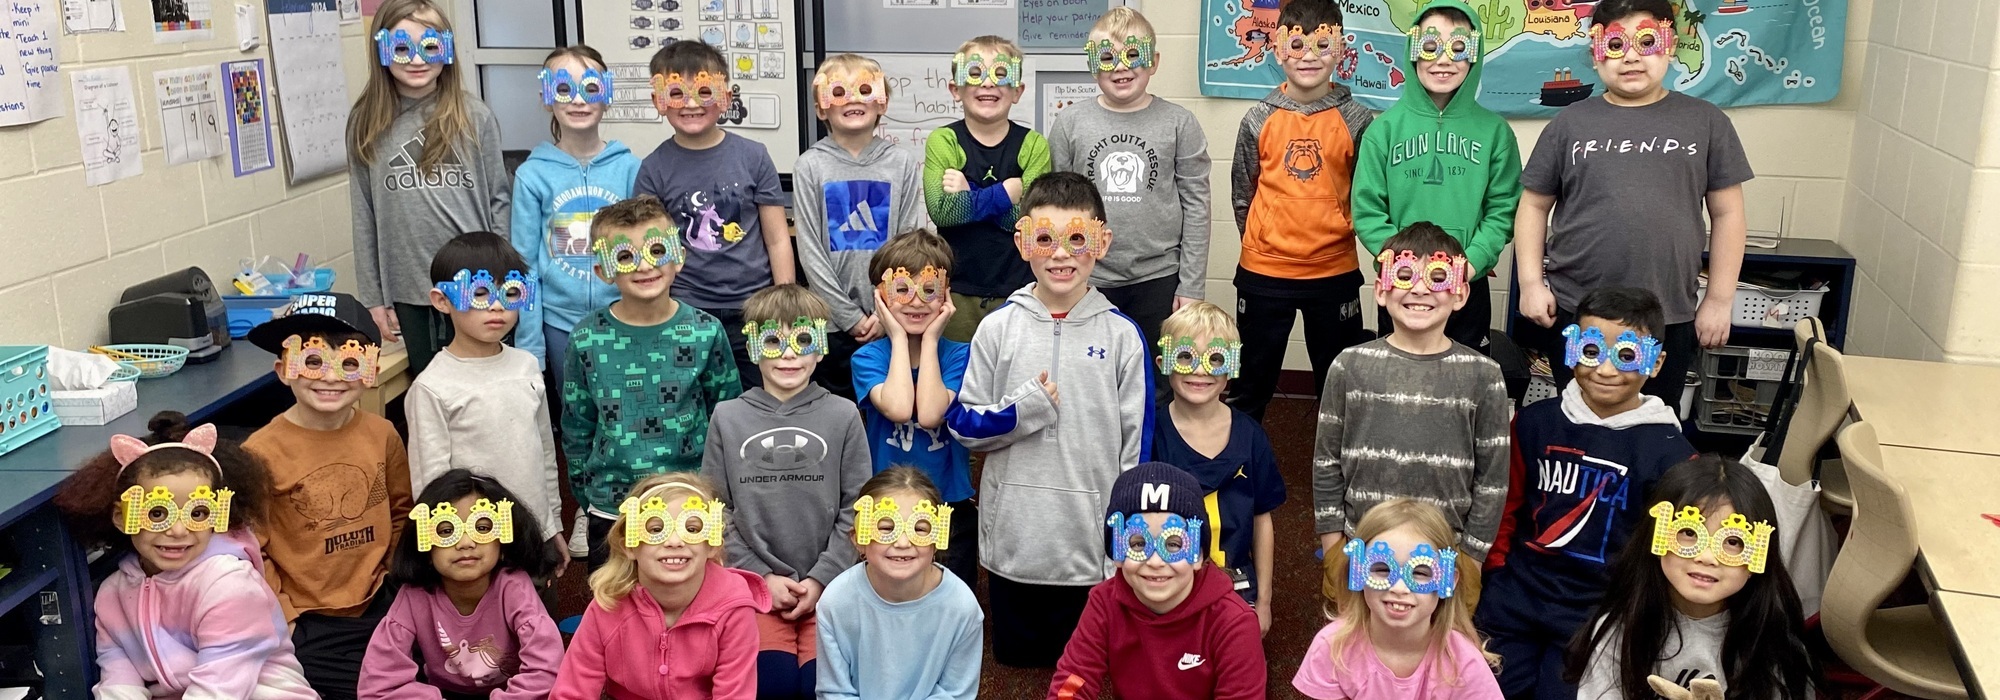 Students celebrate the 100th Day of School